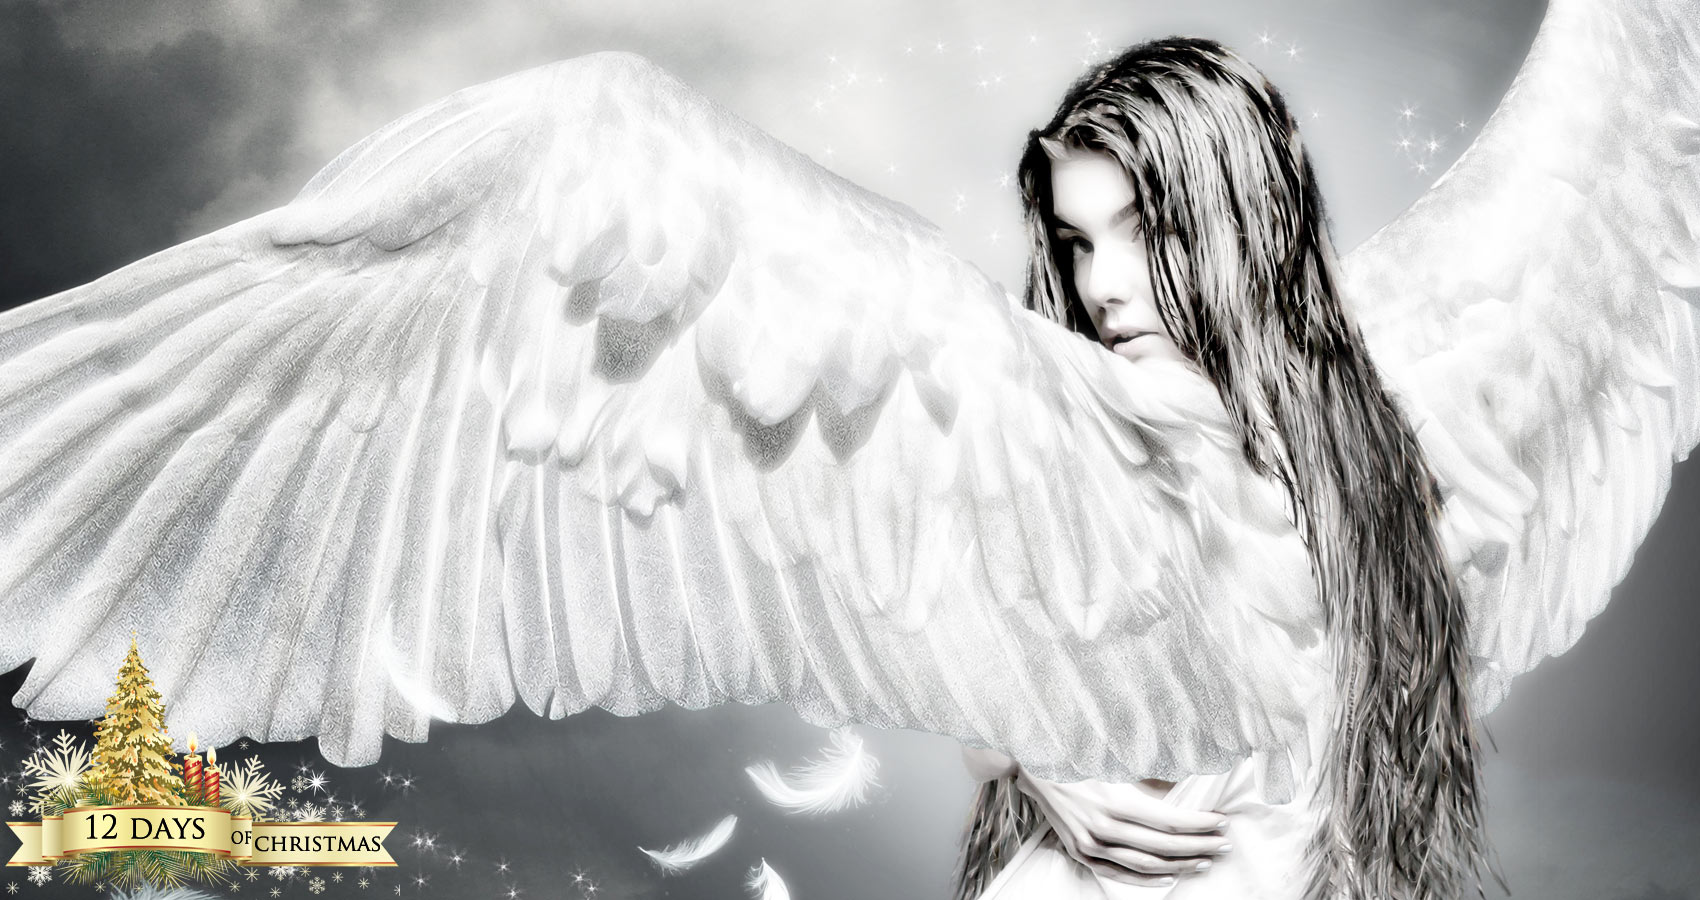 A Christmas Angel, poem by Phyllis P. Colucci at Spillwords.com